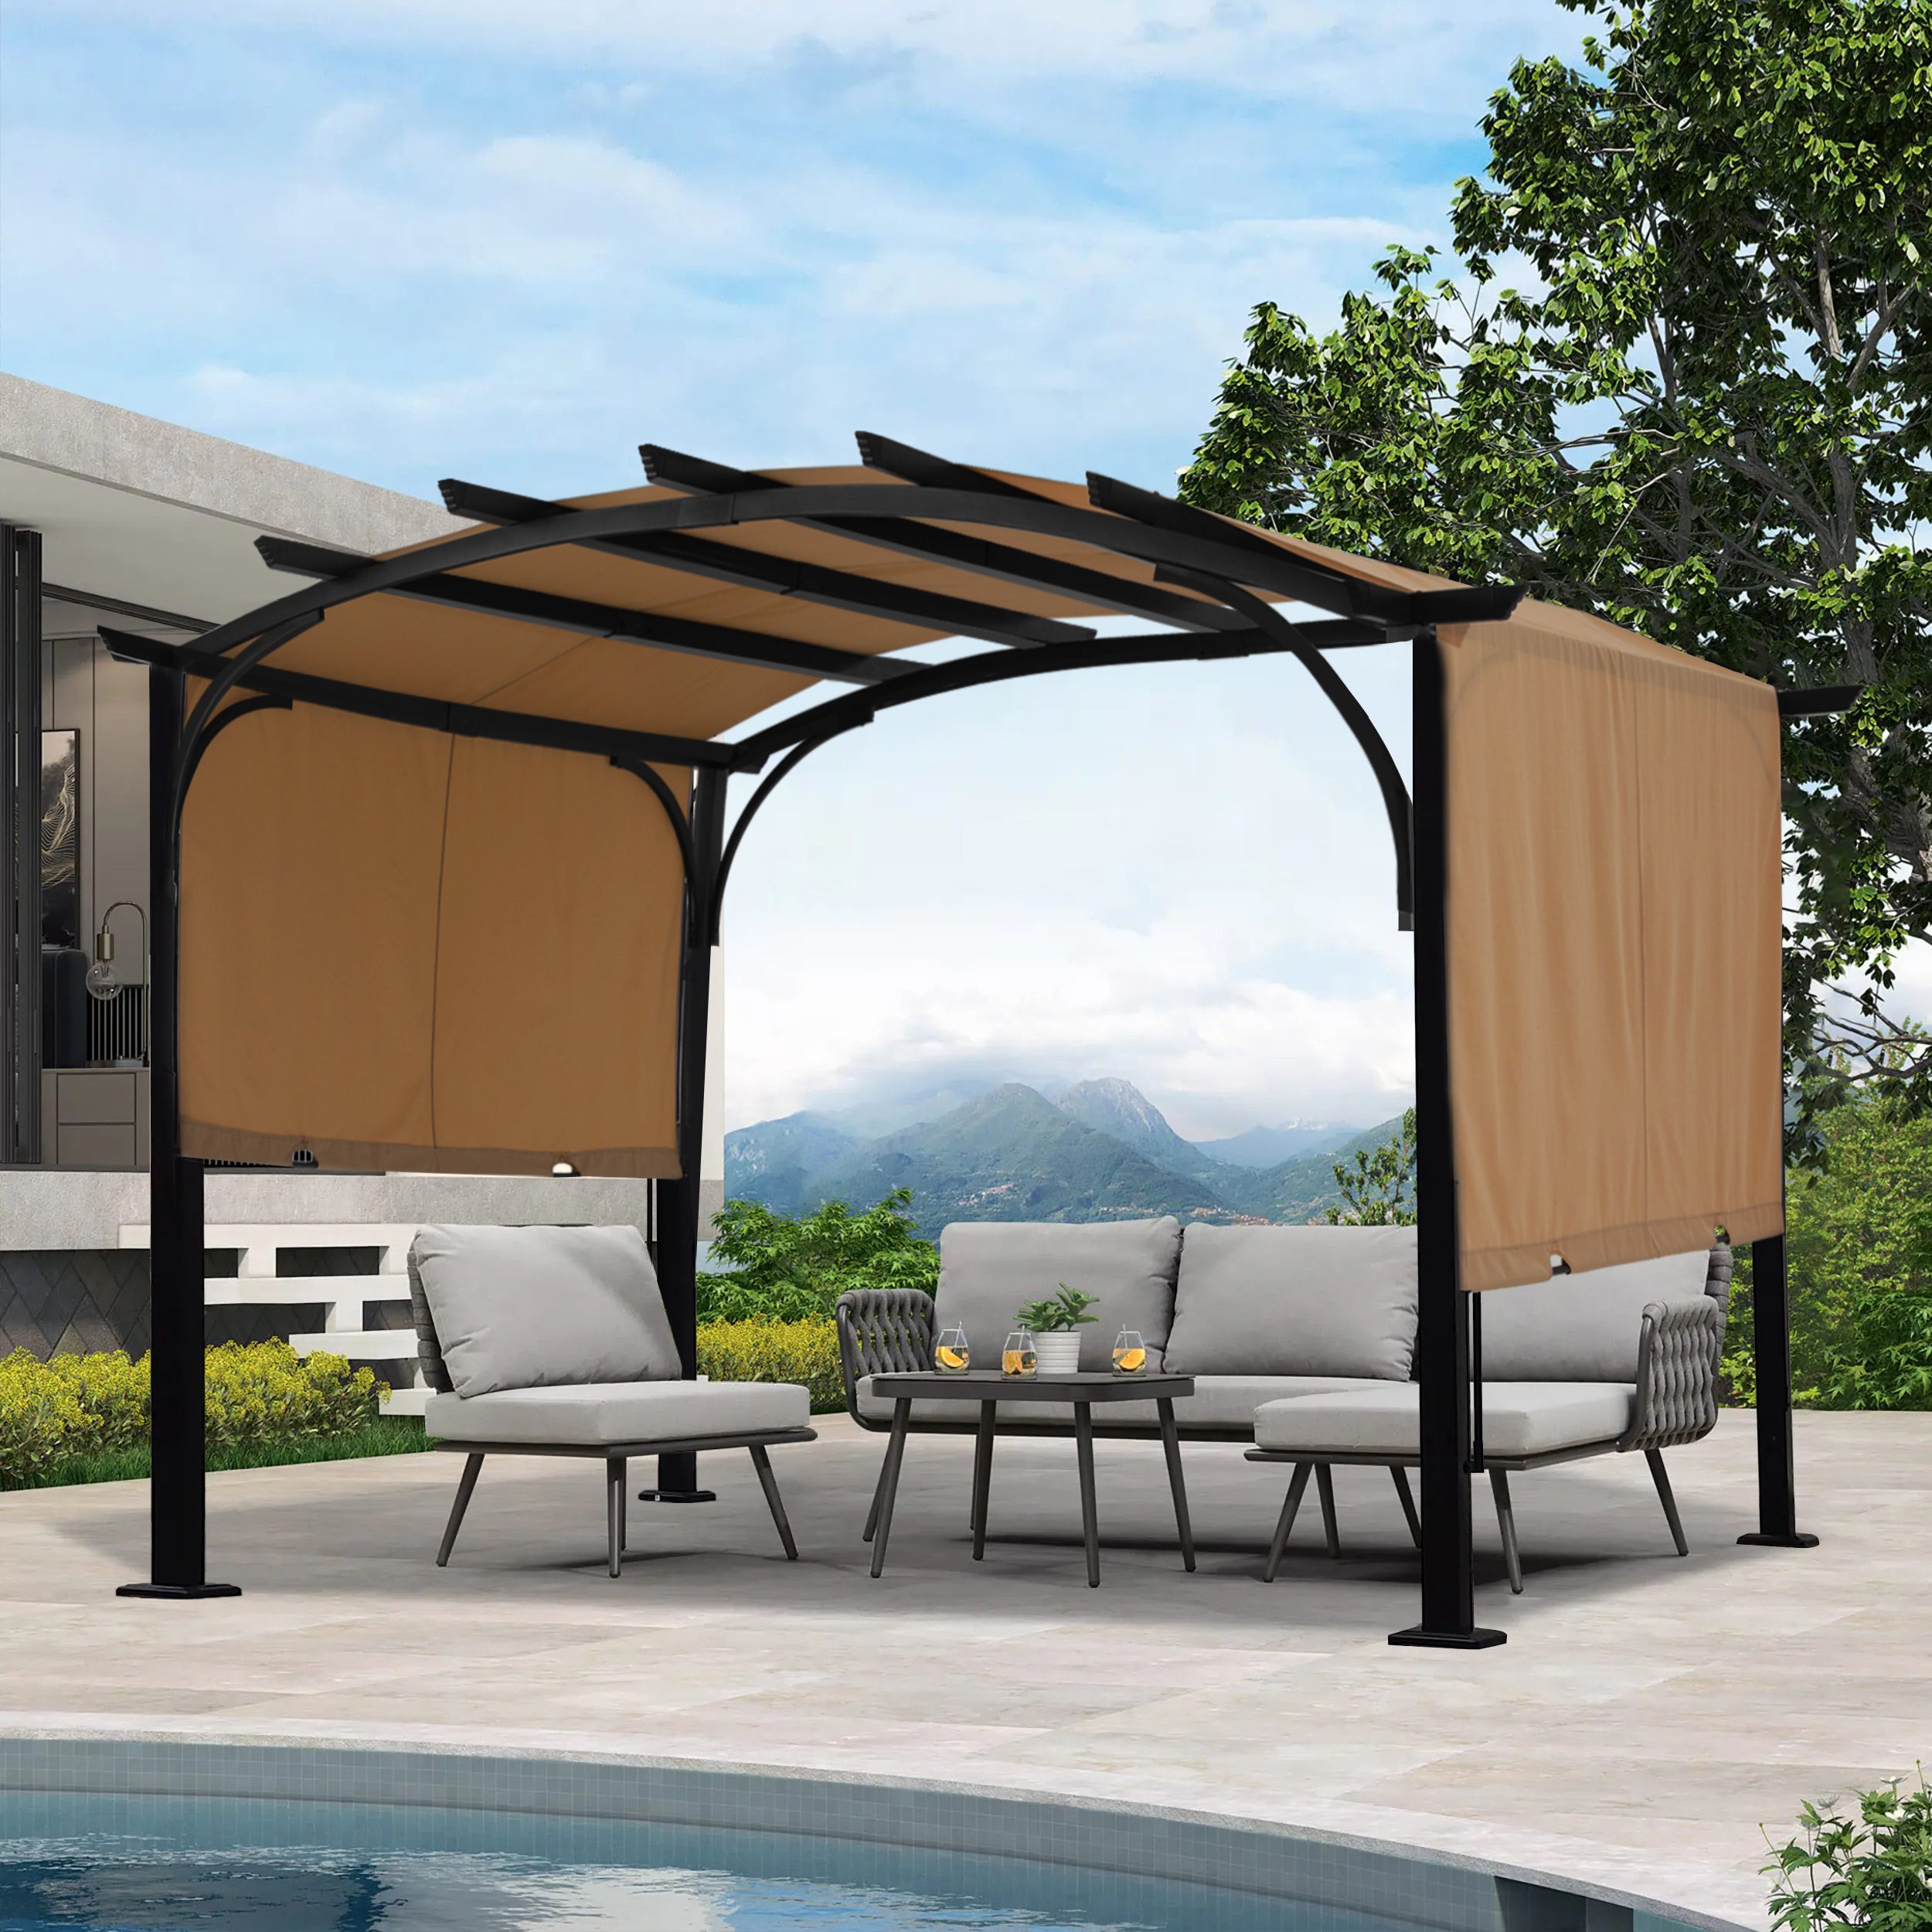 Arched 10x10/10x12 Patio Gazebo with Retractable Sun Shade